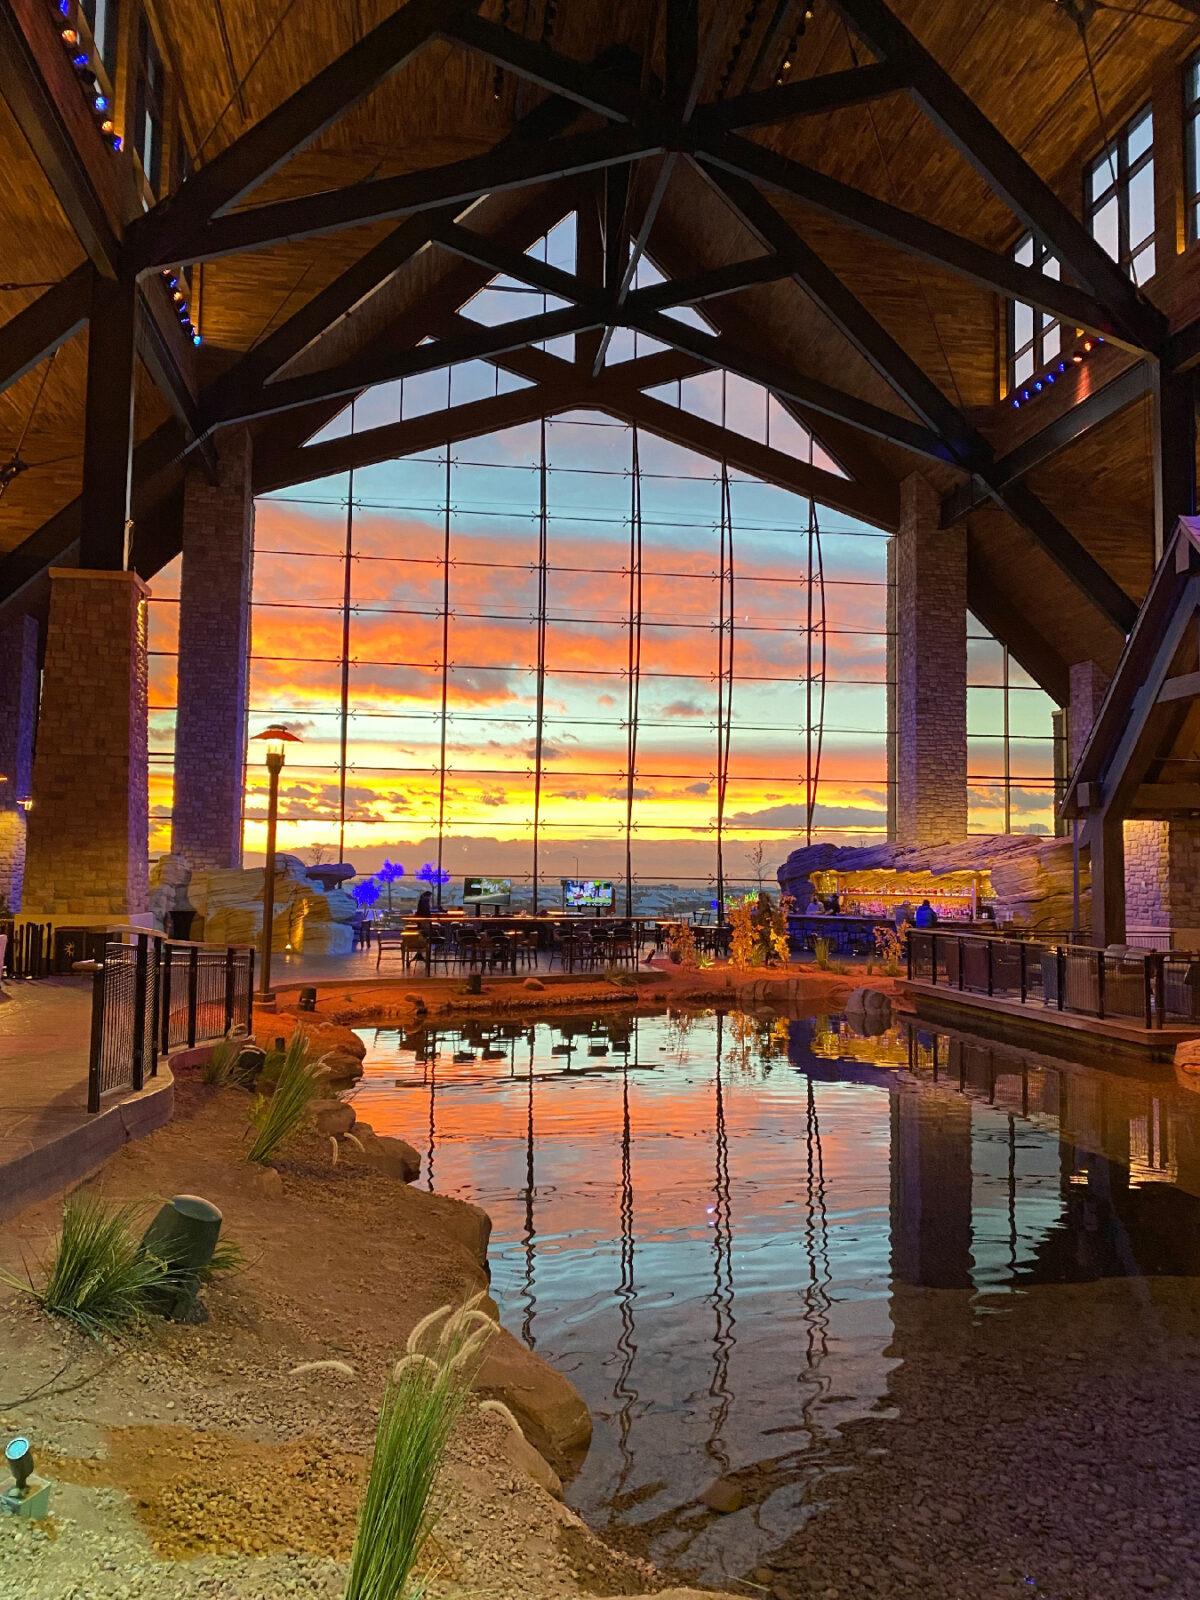 The Gaylord Rockies is a good place to stay en route from Denver to Breckenridge, Colo. (Margot Black)